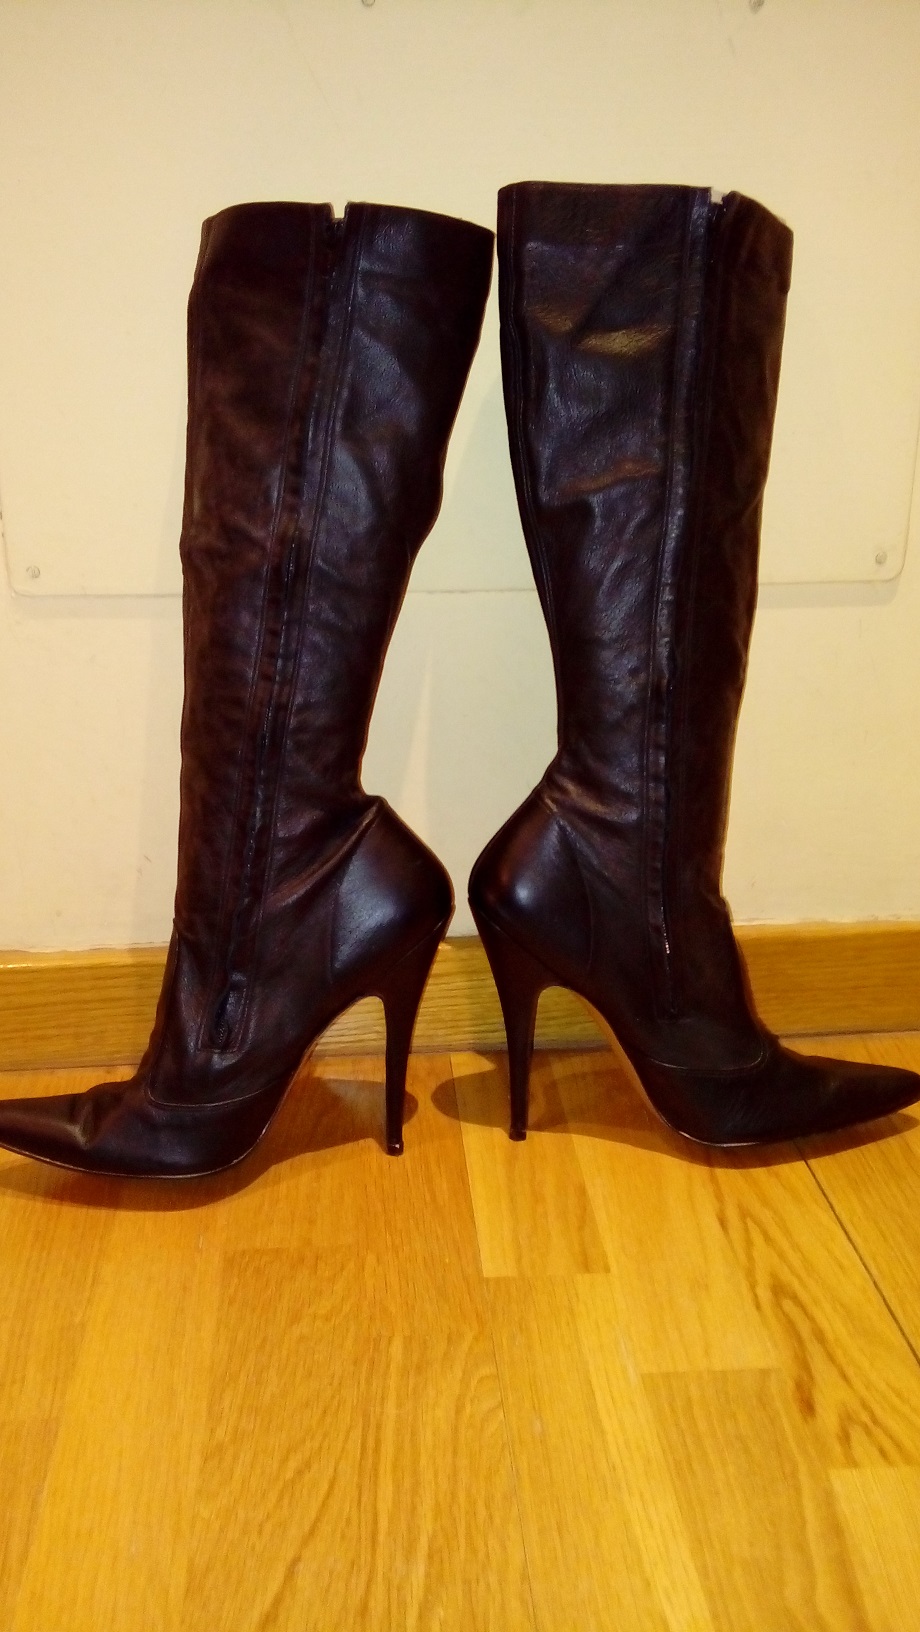 Black Leather Boots size UK10.5 from Leatherworks - Buy / Sell / Swap ...